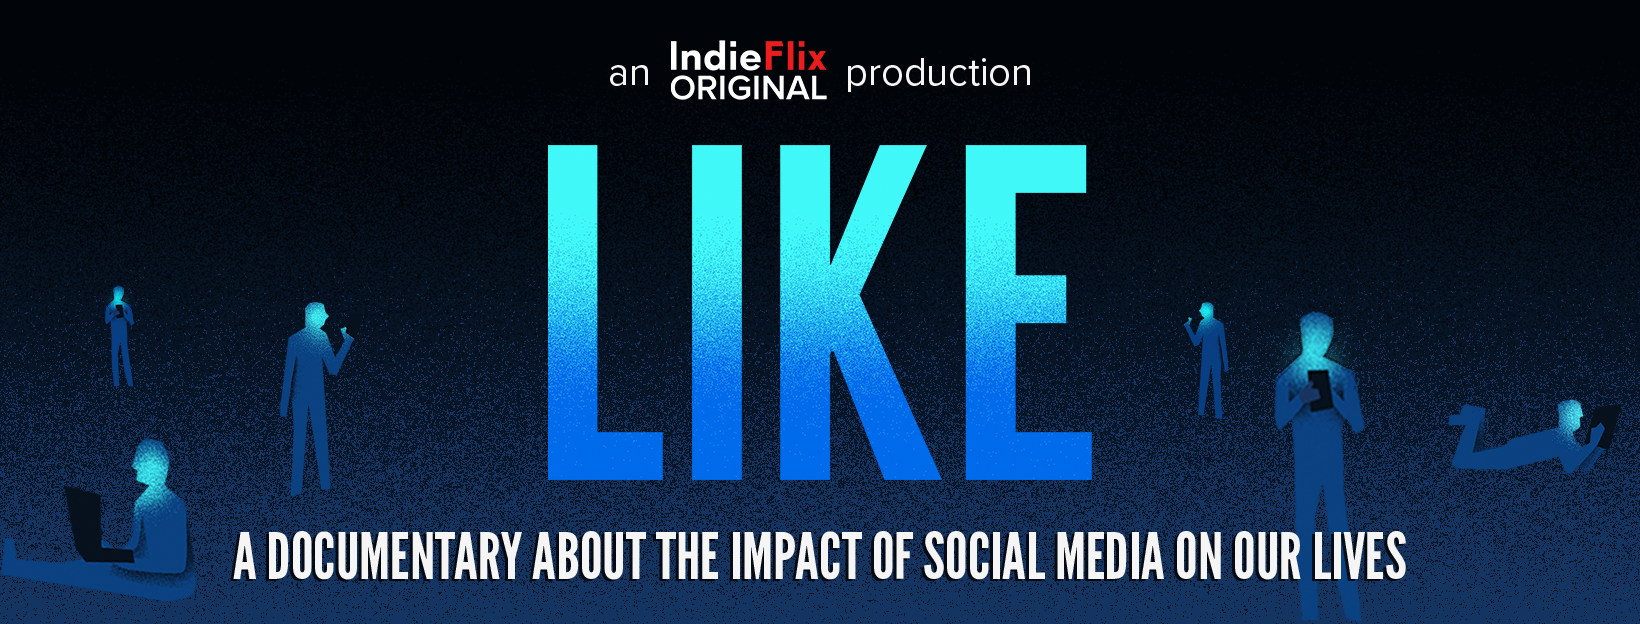 poster for "Like"